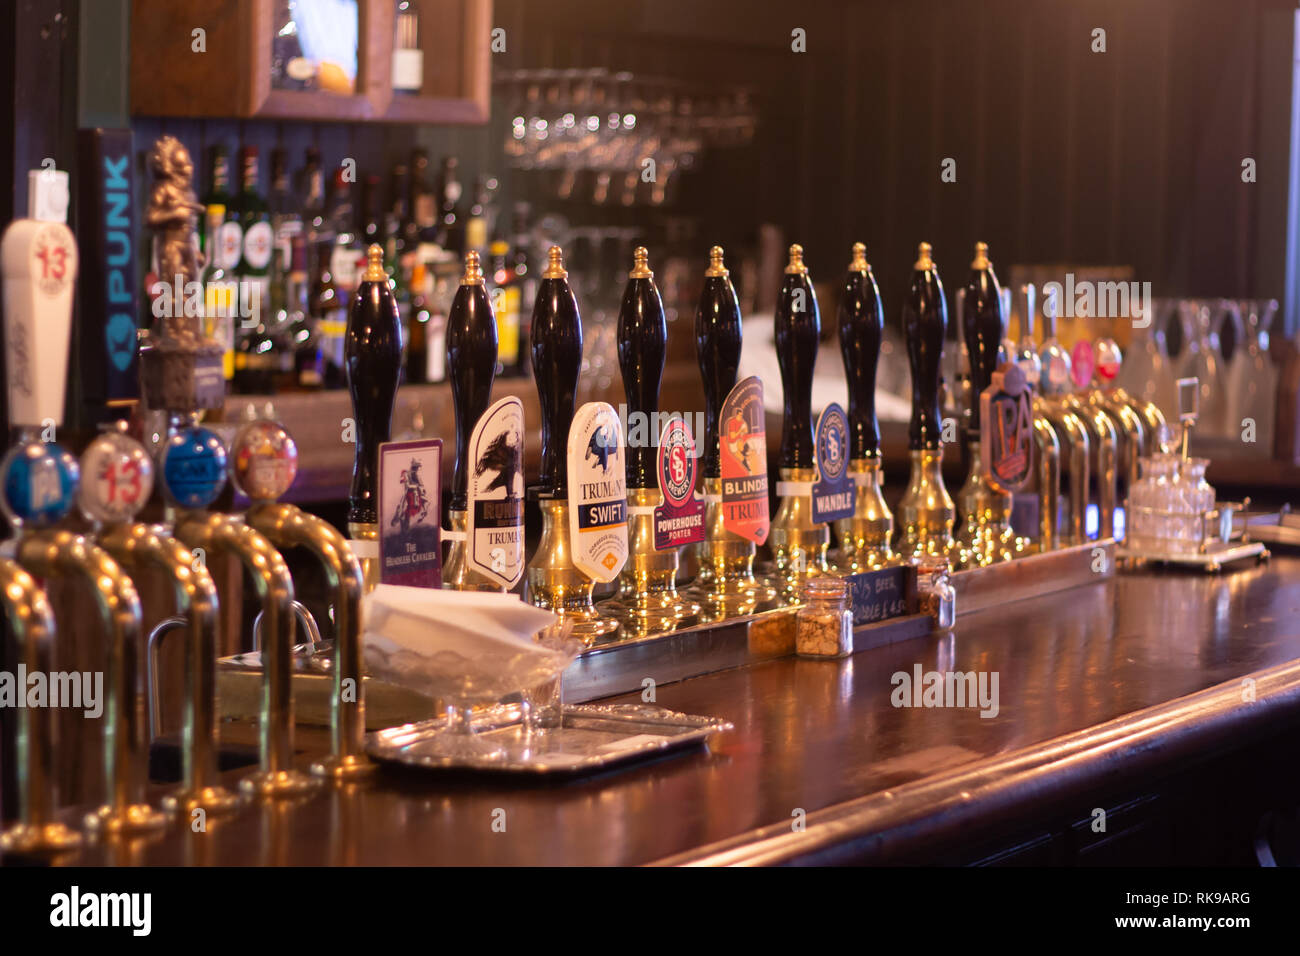 Beers on tap in a traditional english pub in London Stock Photo